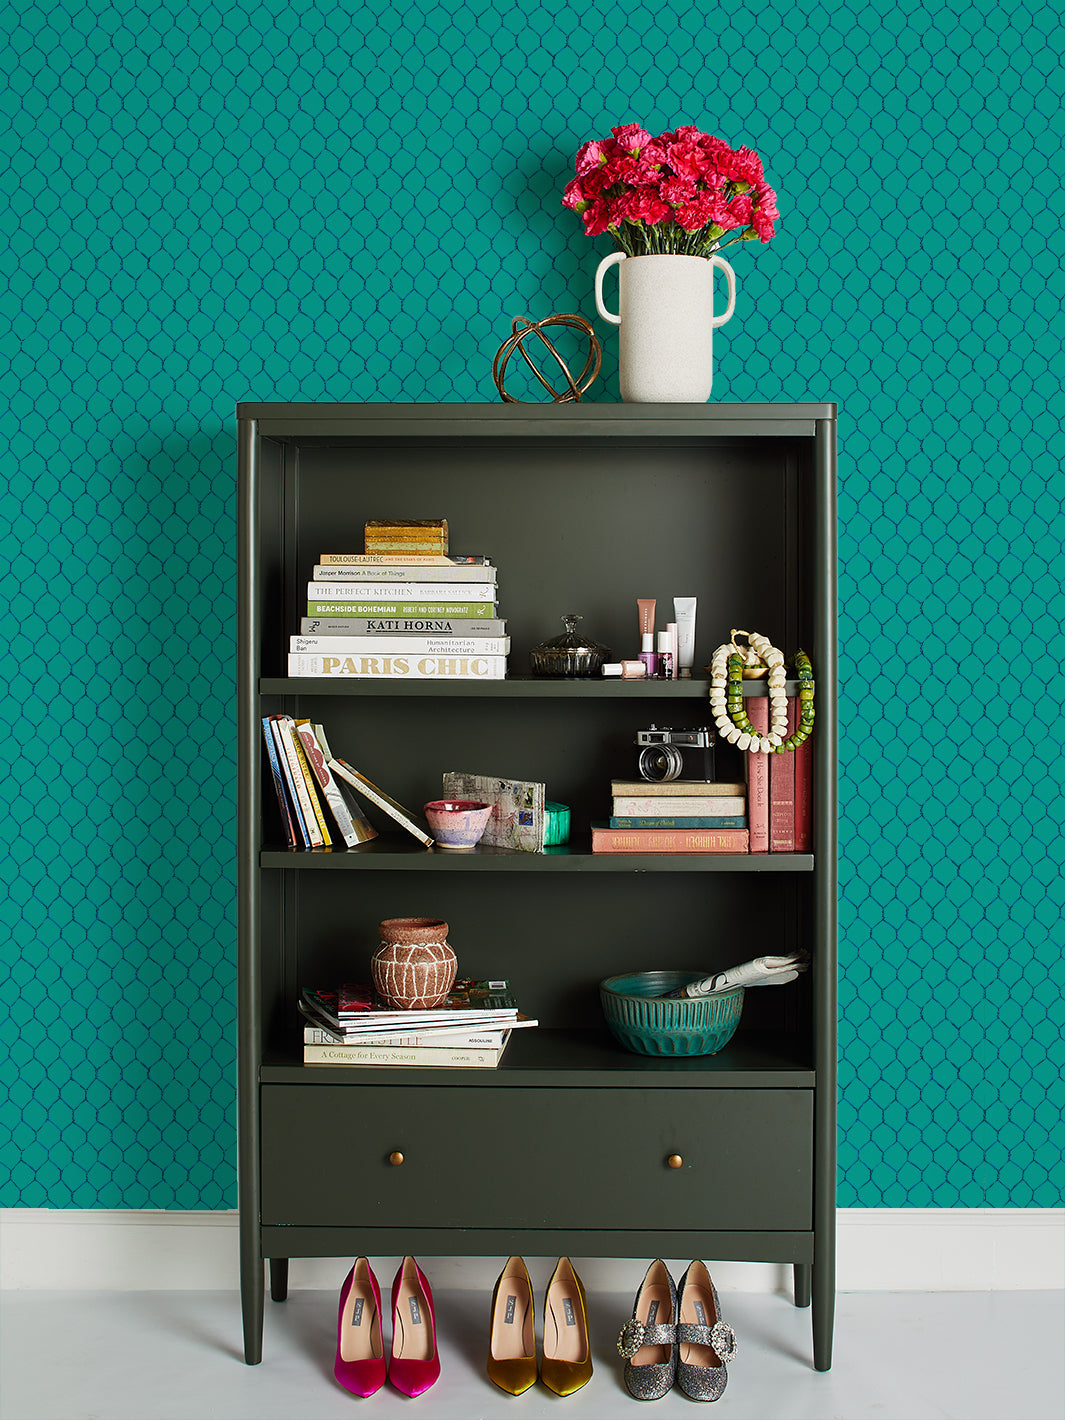 'Evelyn's Chicken Wire' Wallpaper by Sarah Jessica Parker - Sapphire on Teal